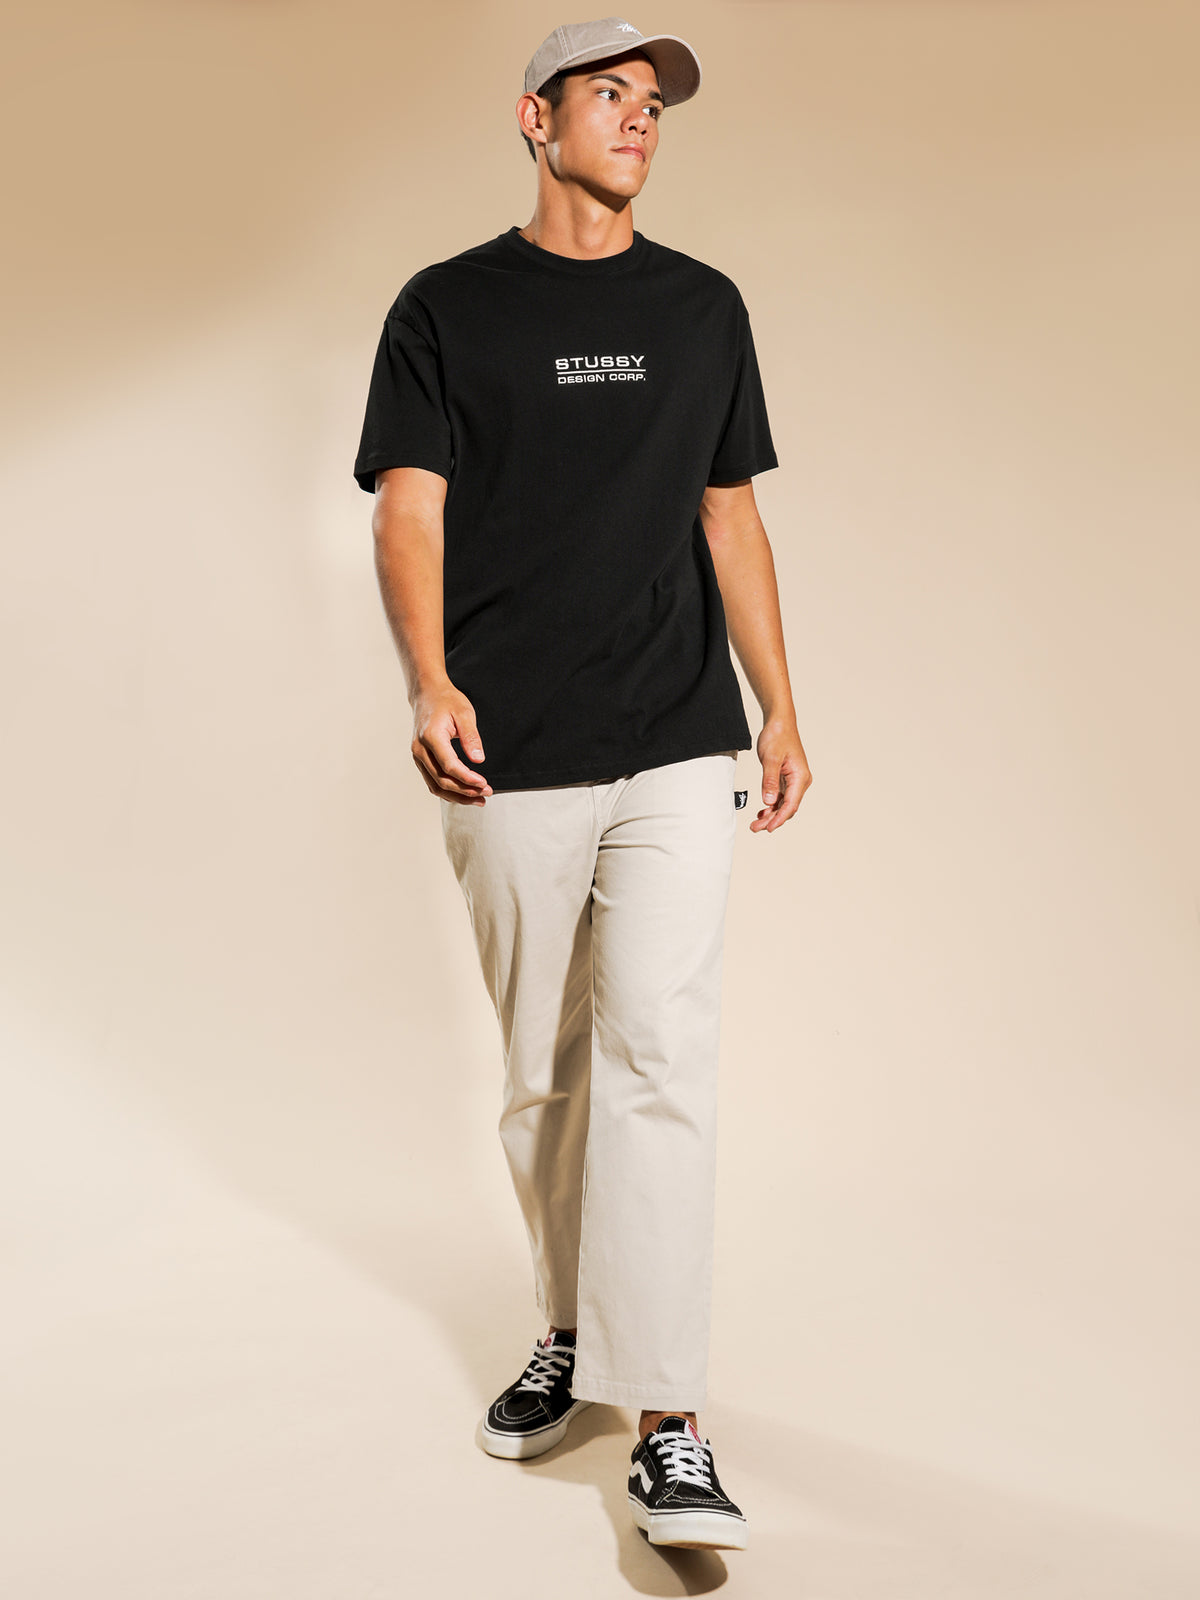 Corp Short Sleeve T-Shirt in Black